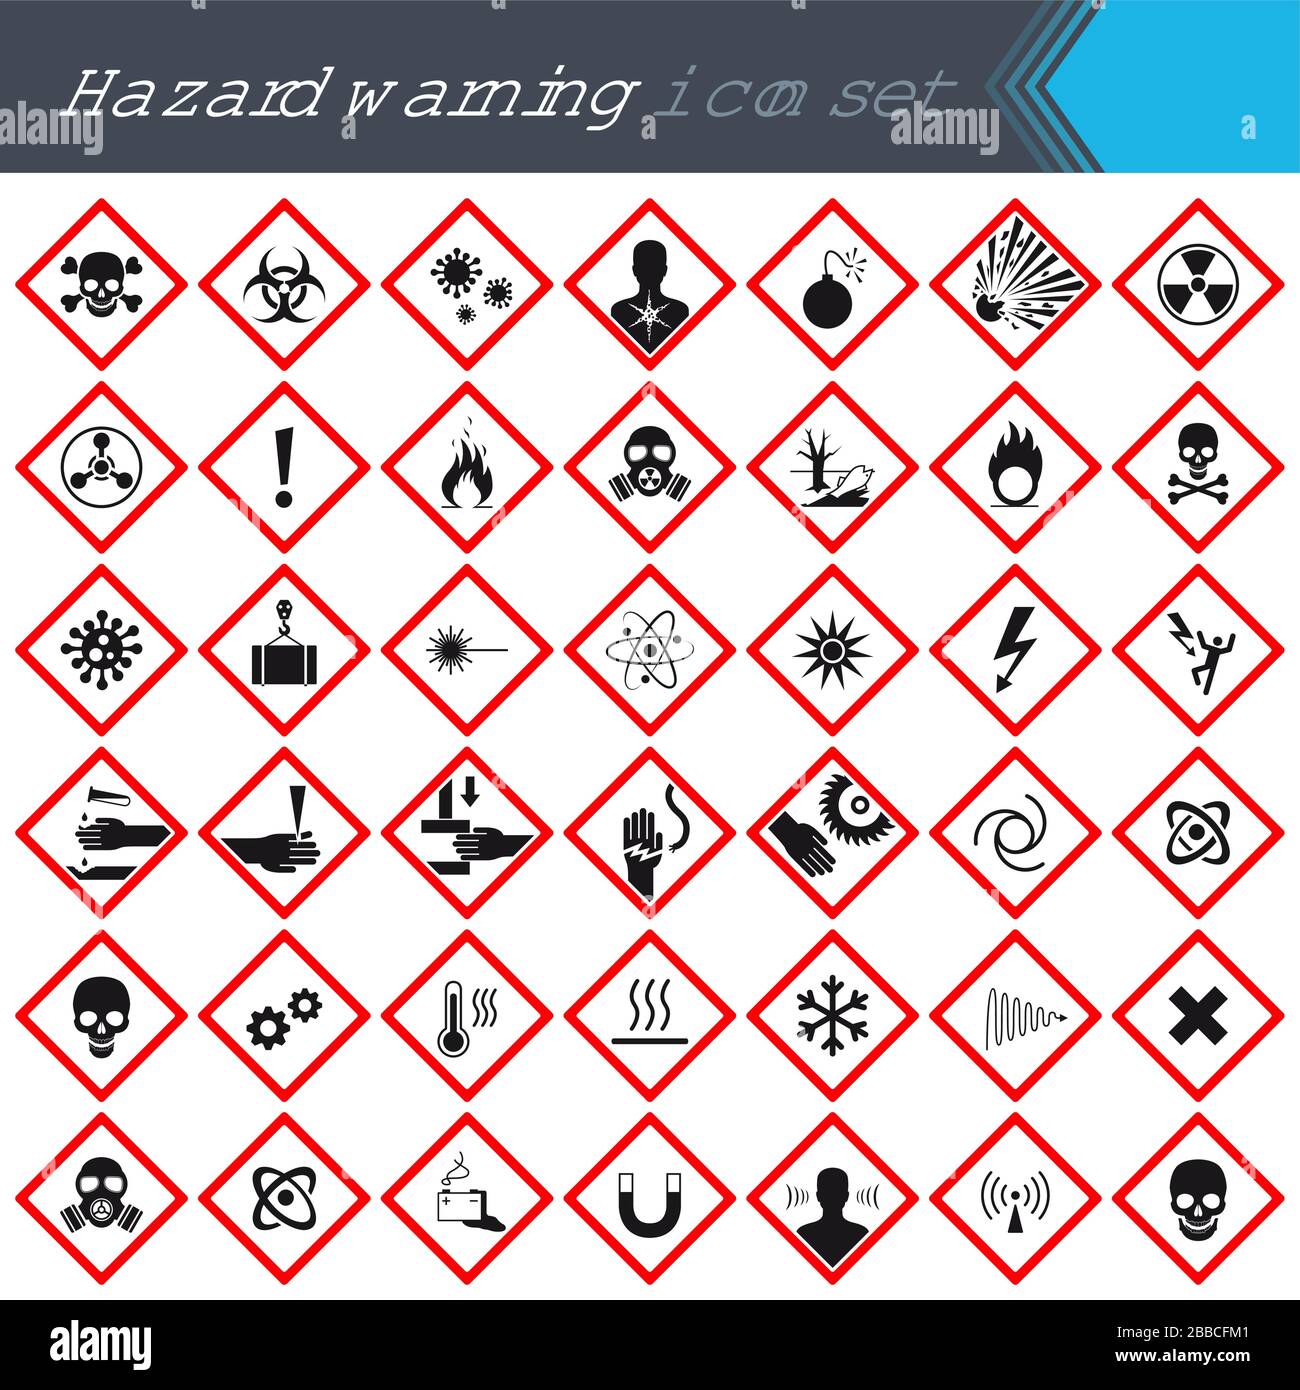 Hazard warning signs on red squares. Set of signs warning about danger. 42 high quality hazard symbols and elements. Danger icons. Vector illustration Stock Vector